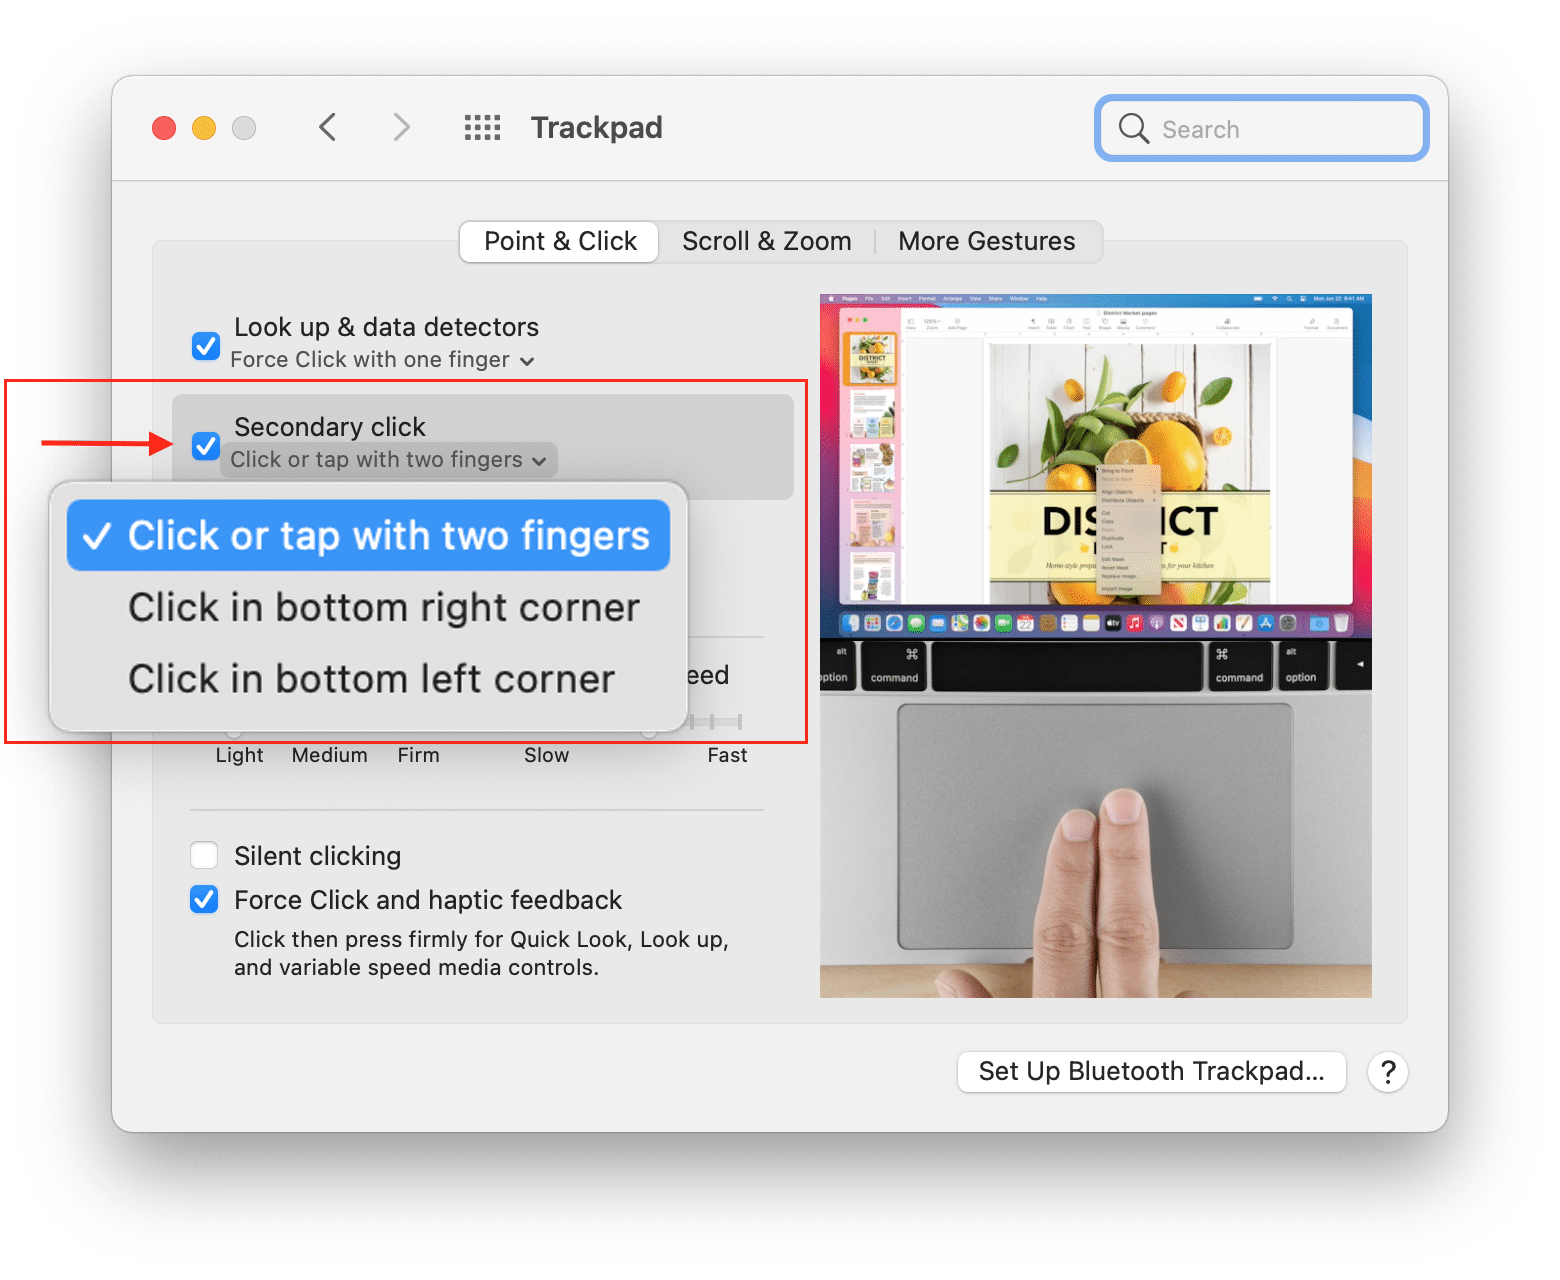 Trackpad preferences window with secondary click option highlighted